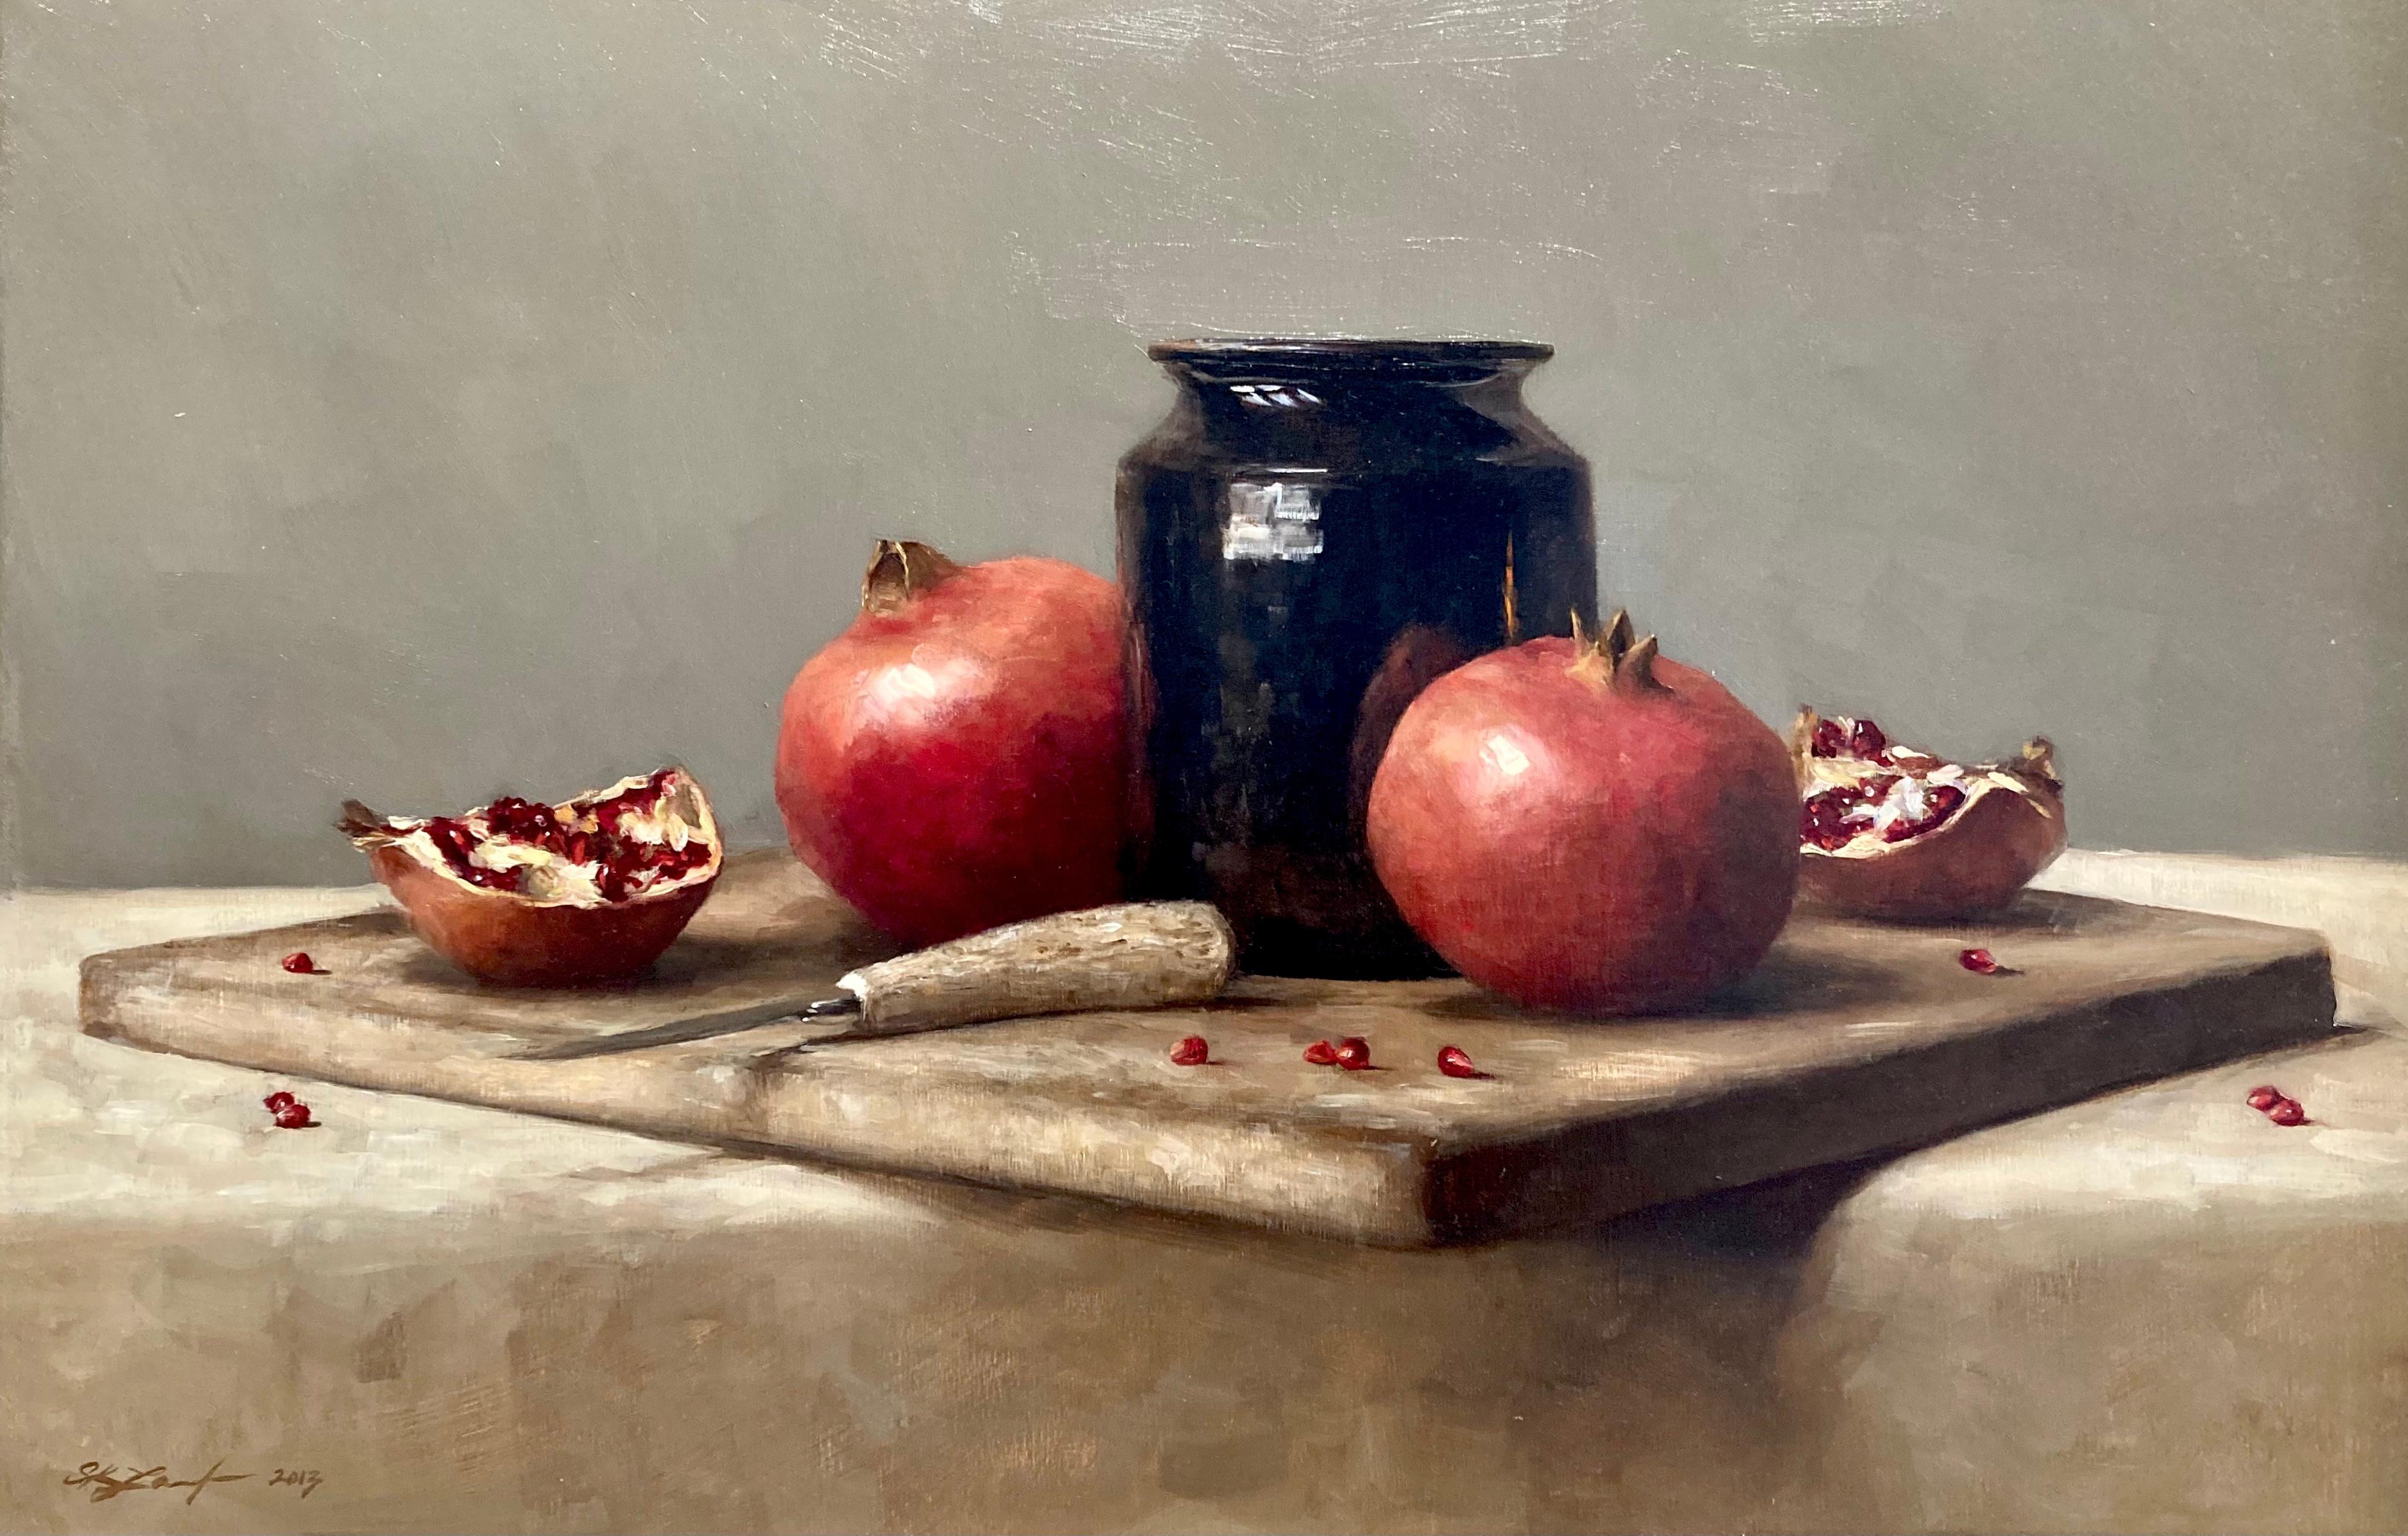 "Pomegranates and Earthenware" is a 2013 Sarah Lamb oil painting still life. 

Sarah Lamb is a talented and dynamic realist painter. With classical skill—and through transparency, depth and texture—she captures the minute details of everyday objects